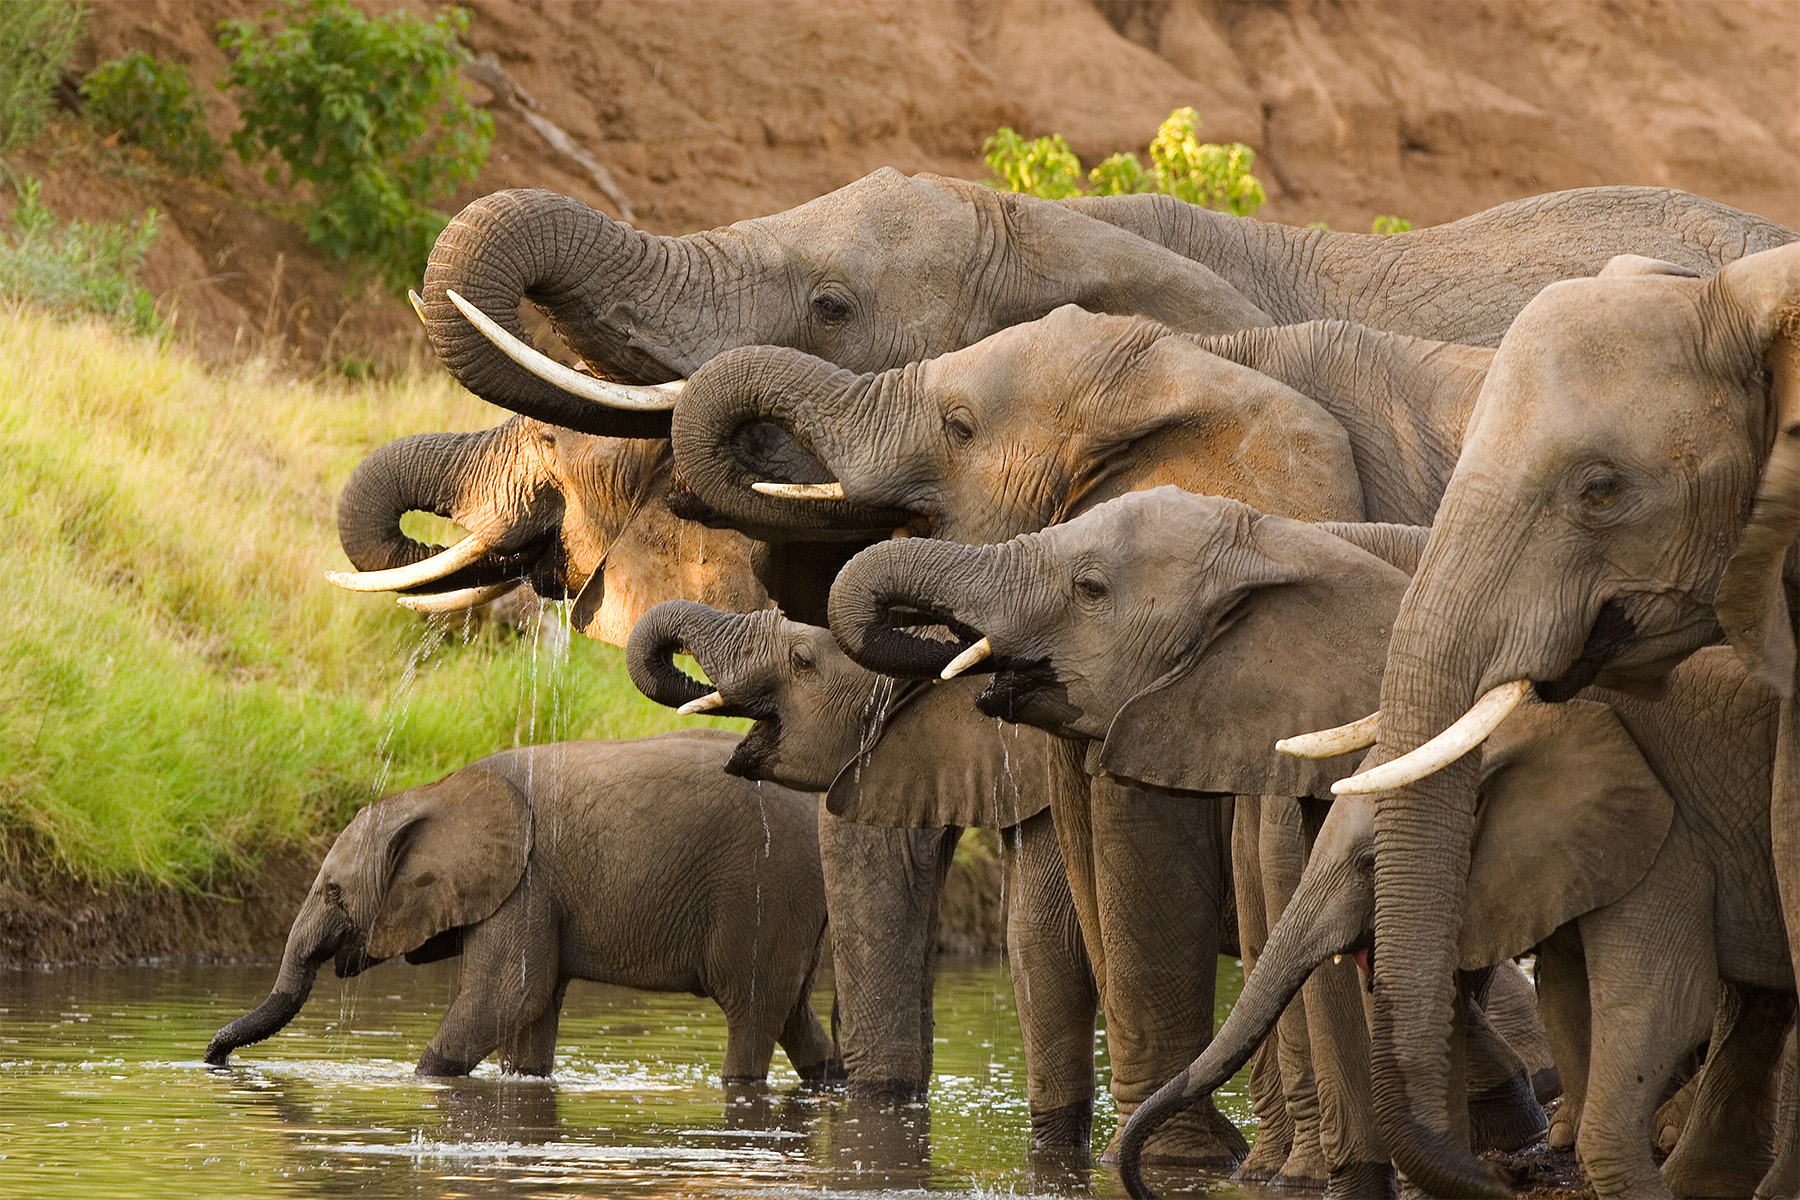 A herd of elephants drinking from a watering hole.